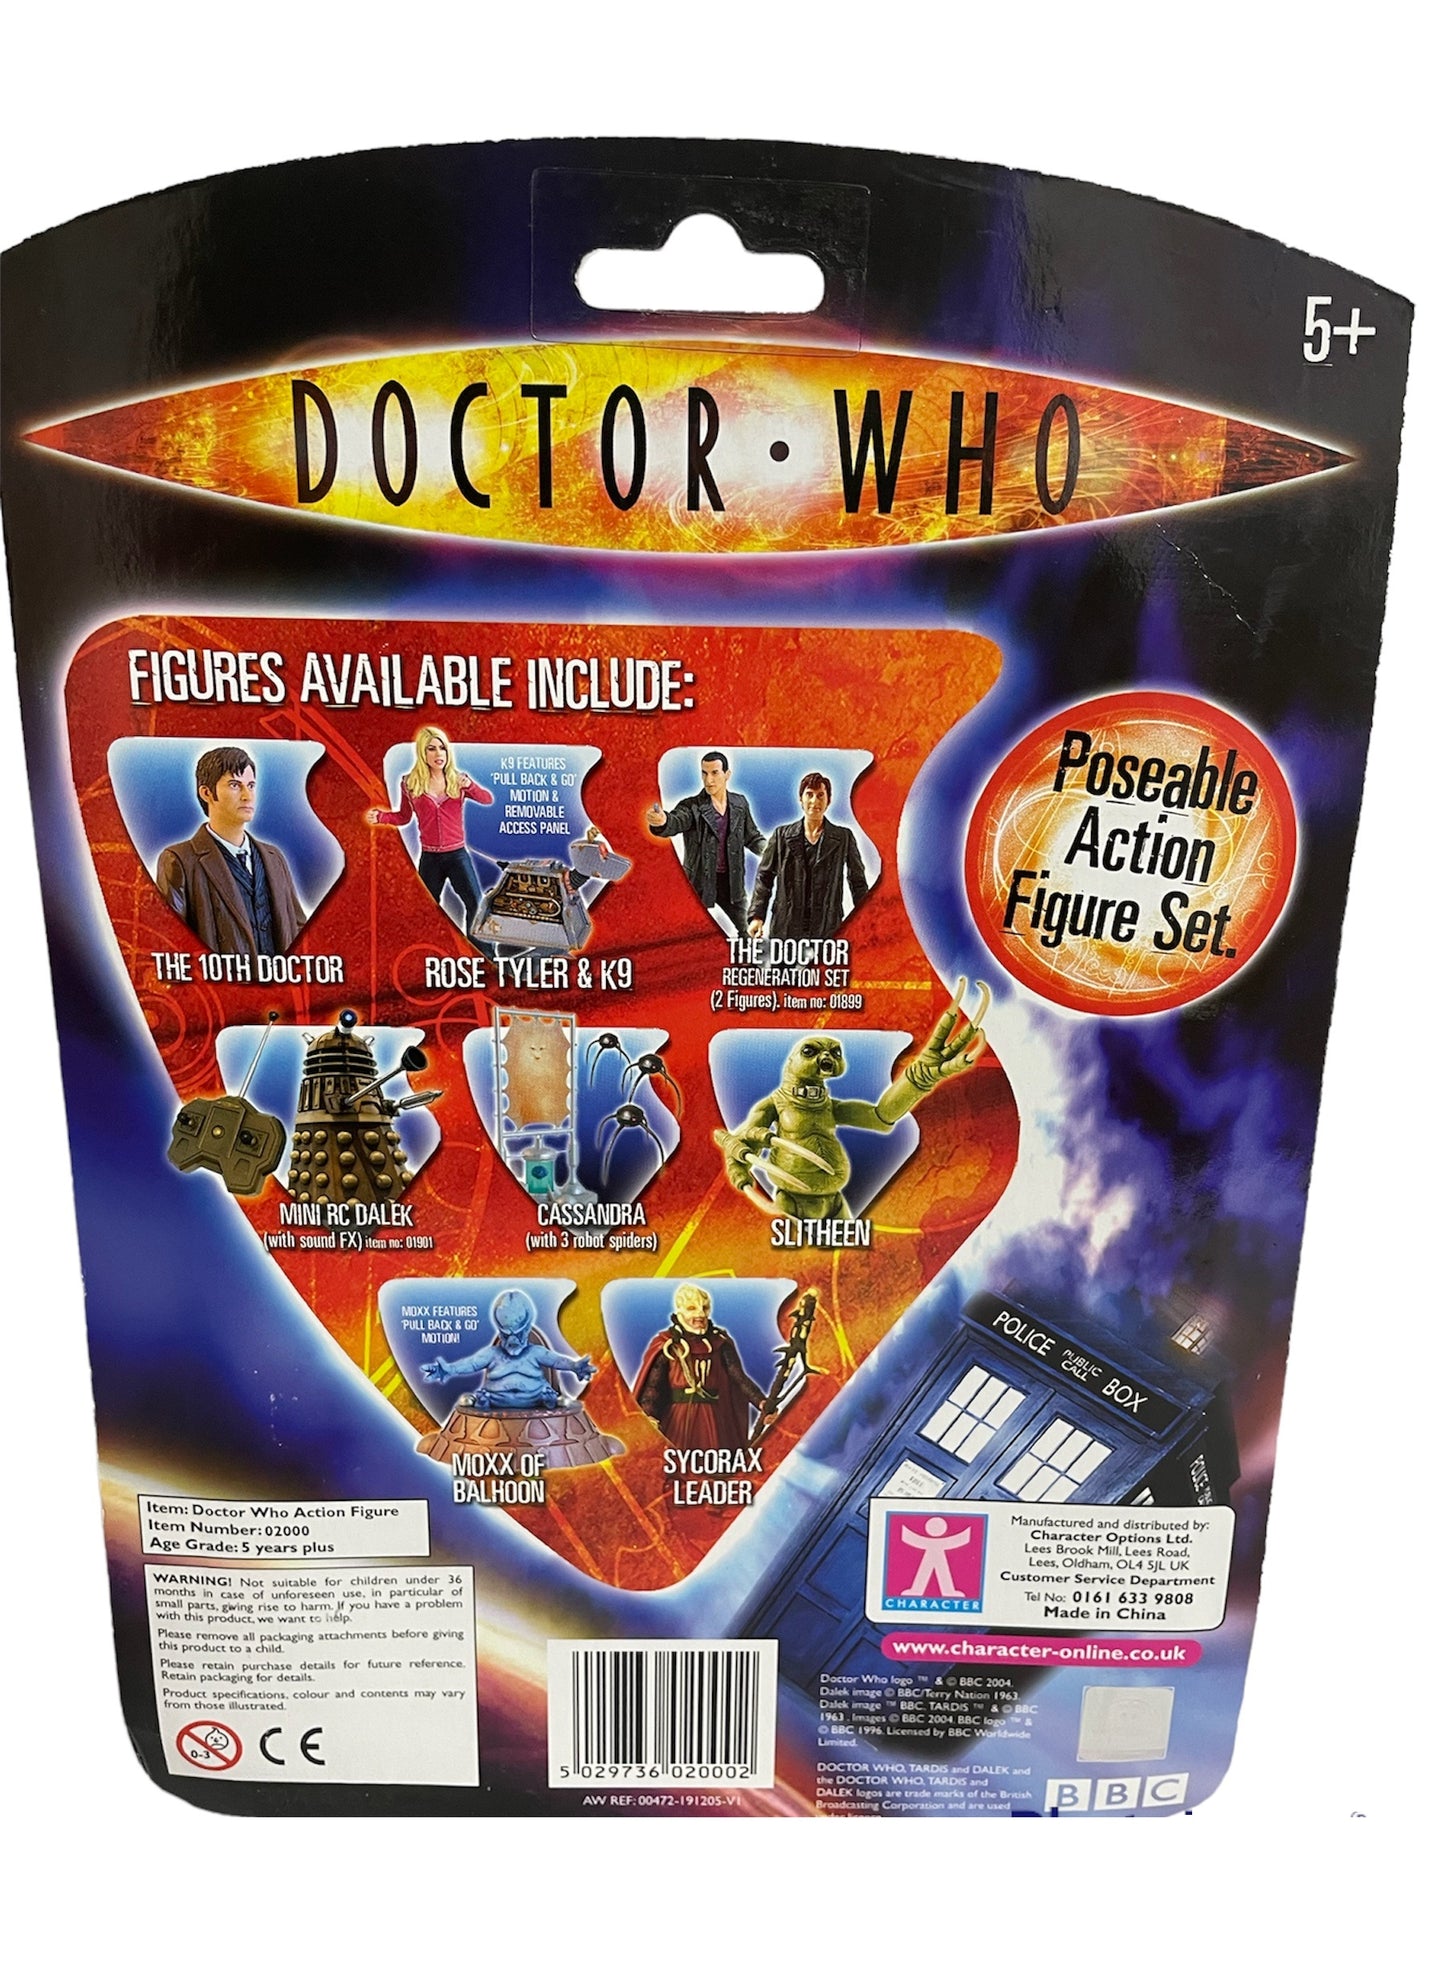 Vintage 2005 Doctor Dr Who - The Moxx Of Balhoon Highly Detailed Poseable Action Figure Original Release - Brand New Factory Sealed Shop Stock Room Find